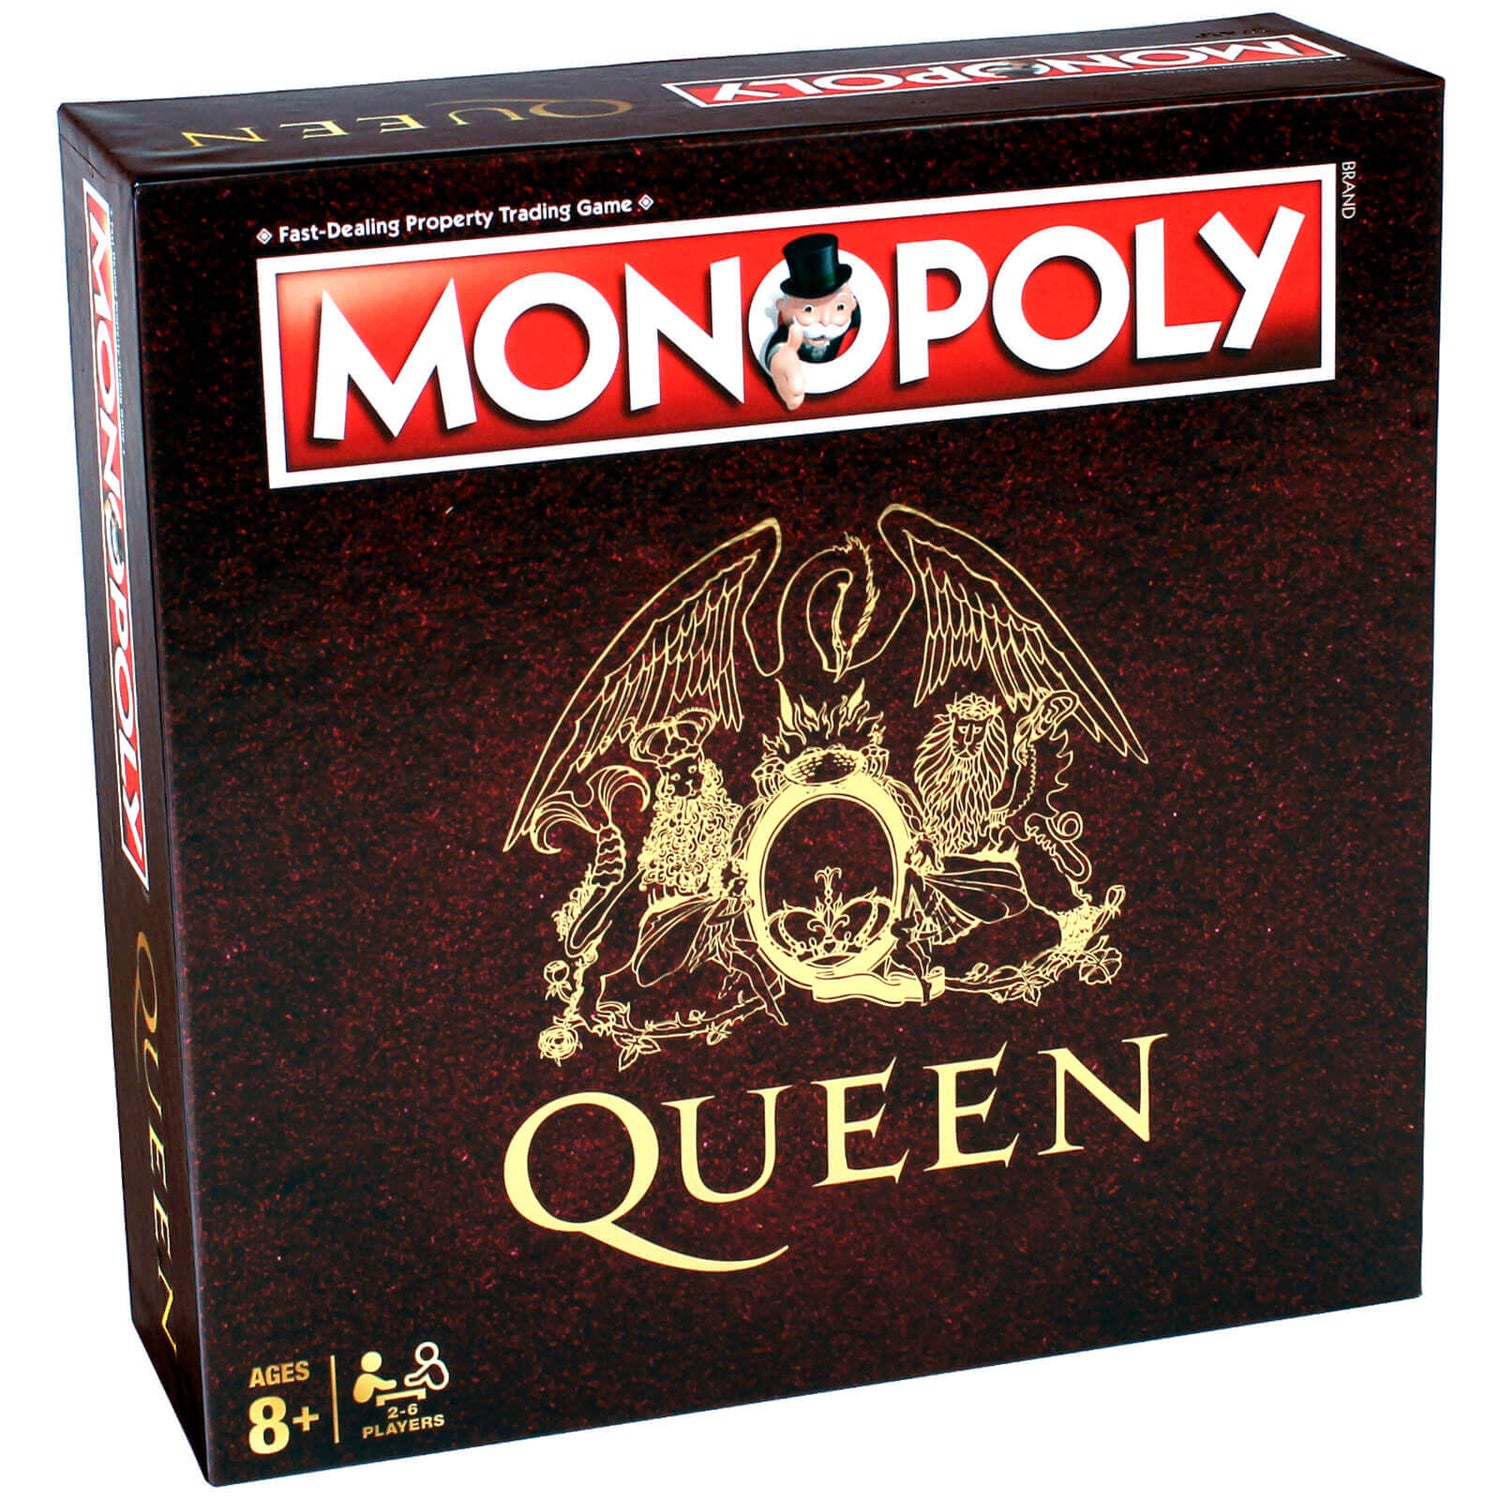 Monopoly Board Game - Queen Edition